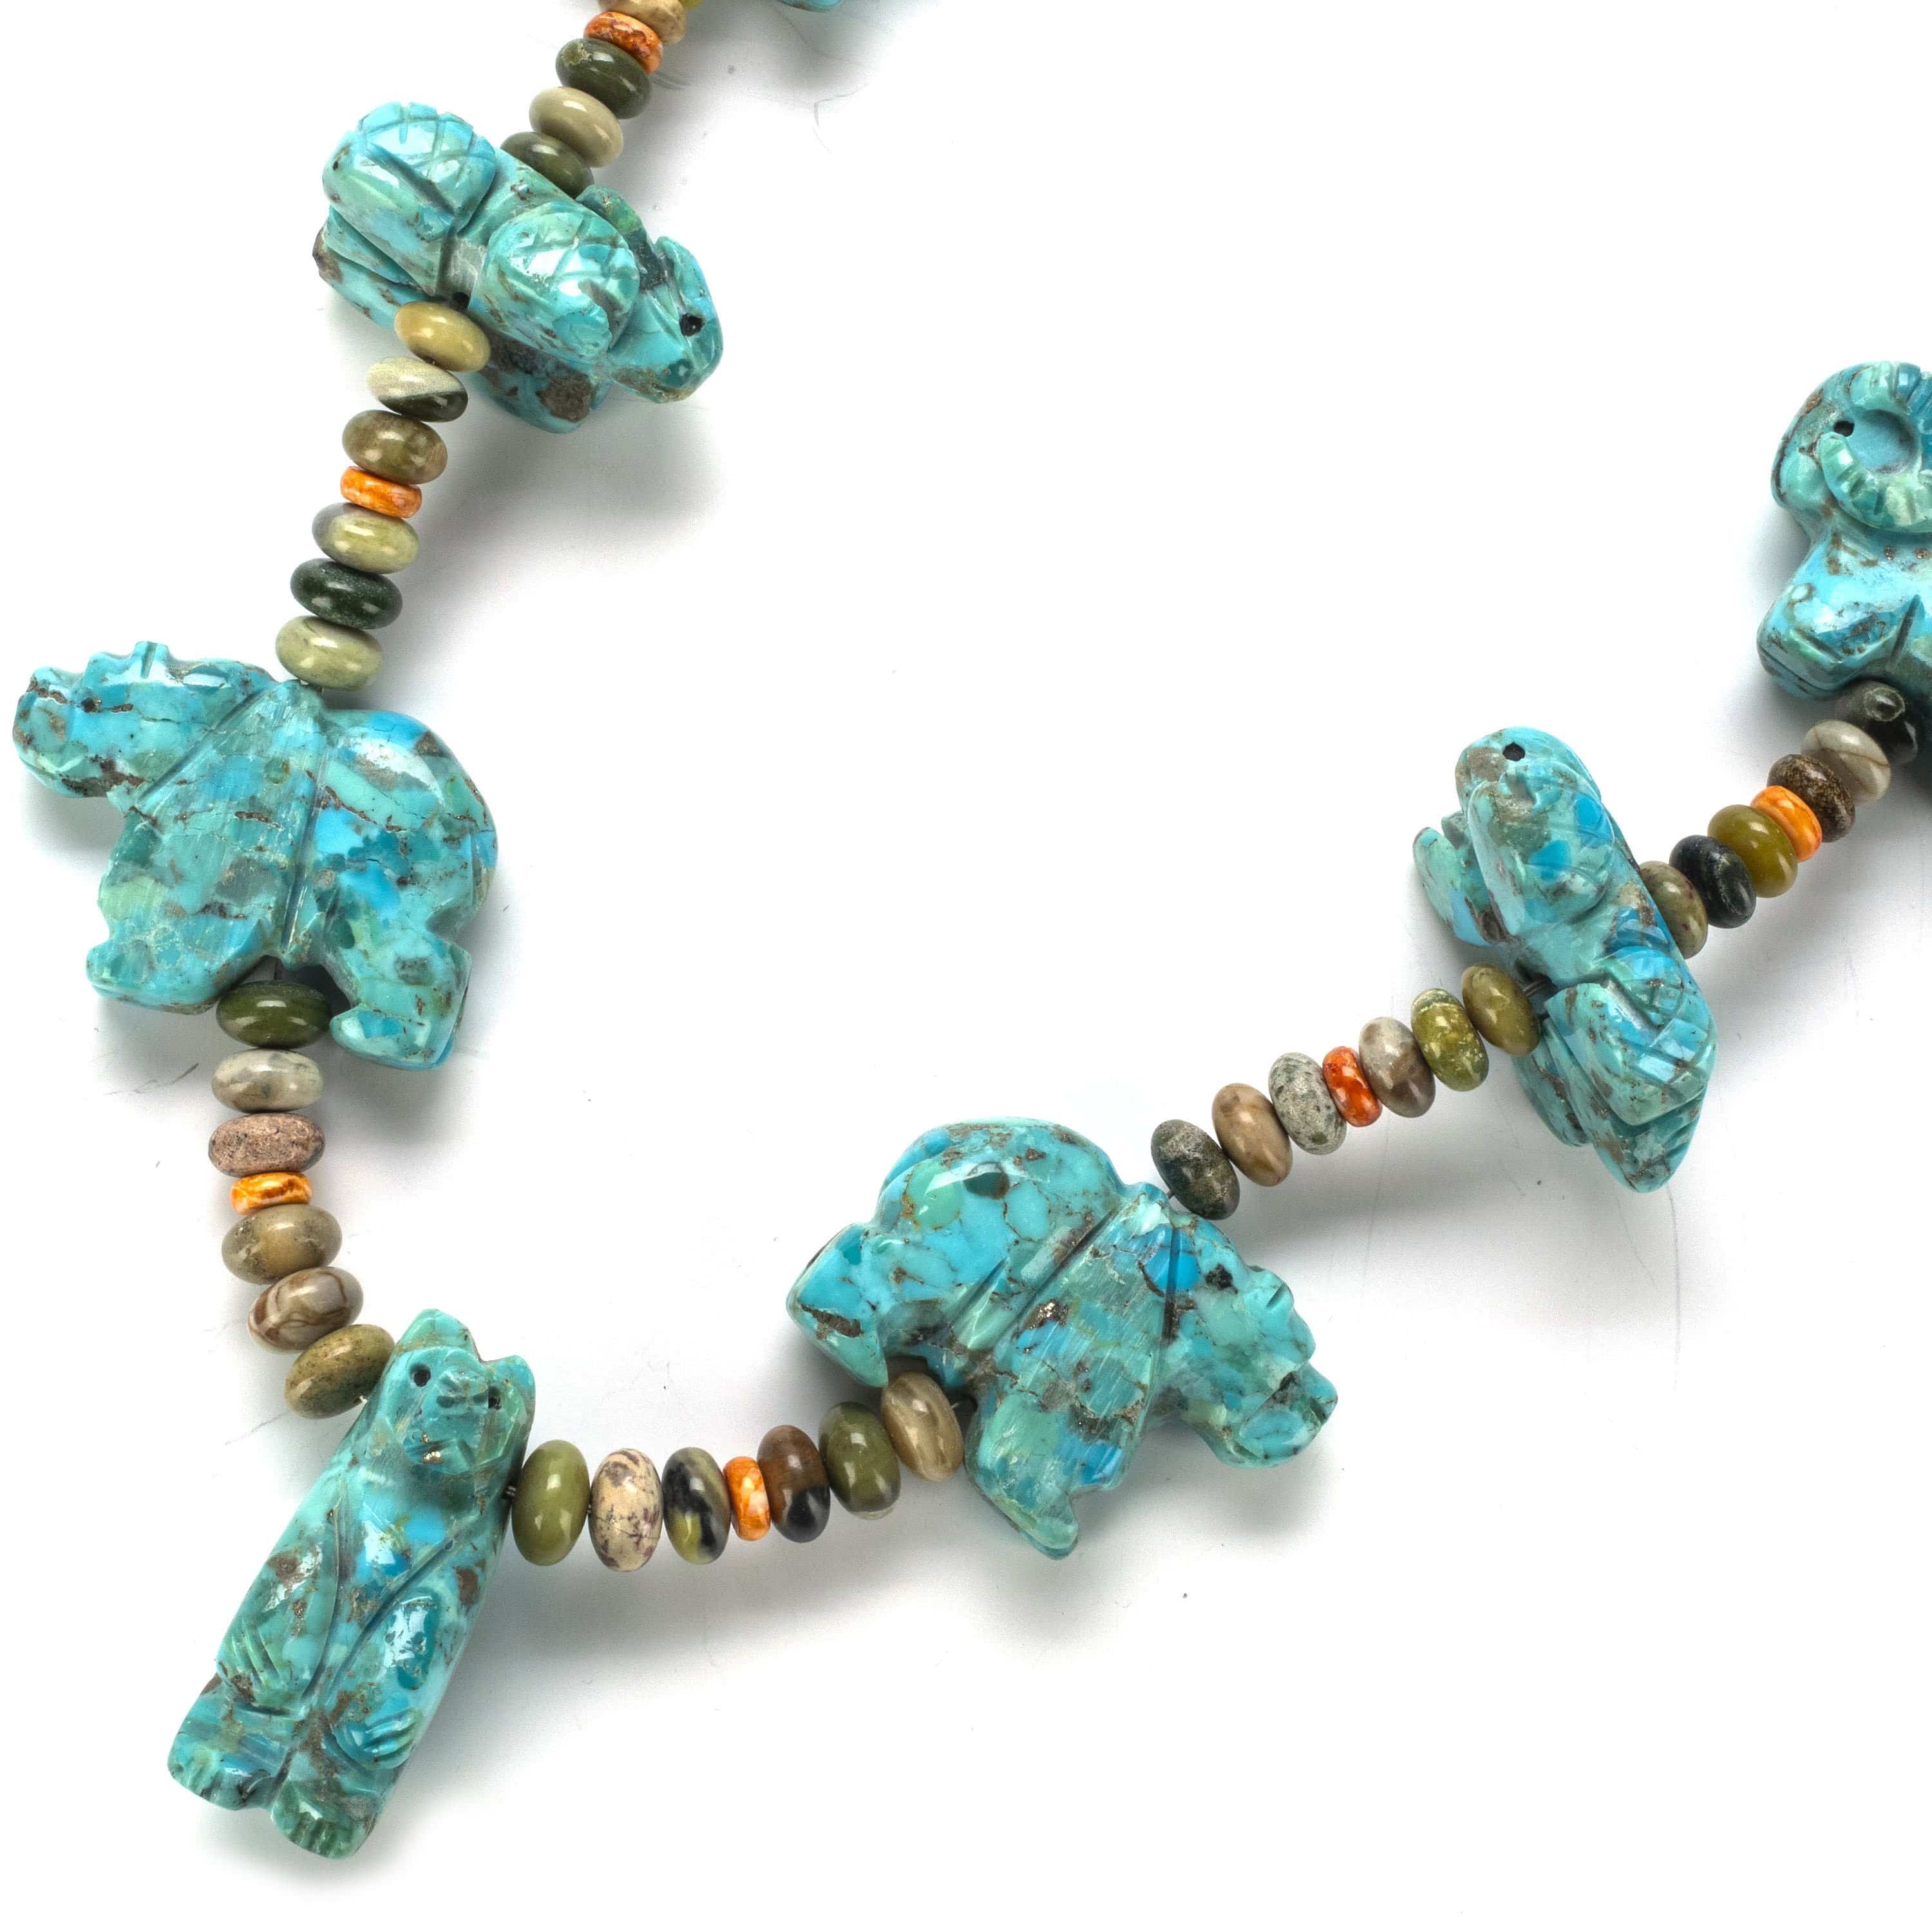 Kalifano Native American Jewelry Stacey Turpin Kingman Turquoise Fetish Carvings USA Native American Made 925 Sterling Silver Necklace NAN2100.001